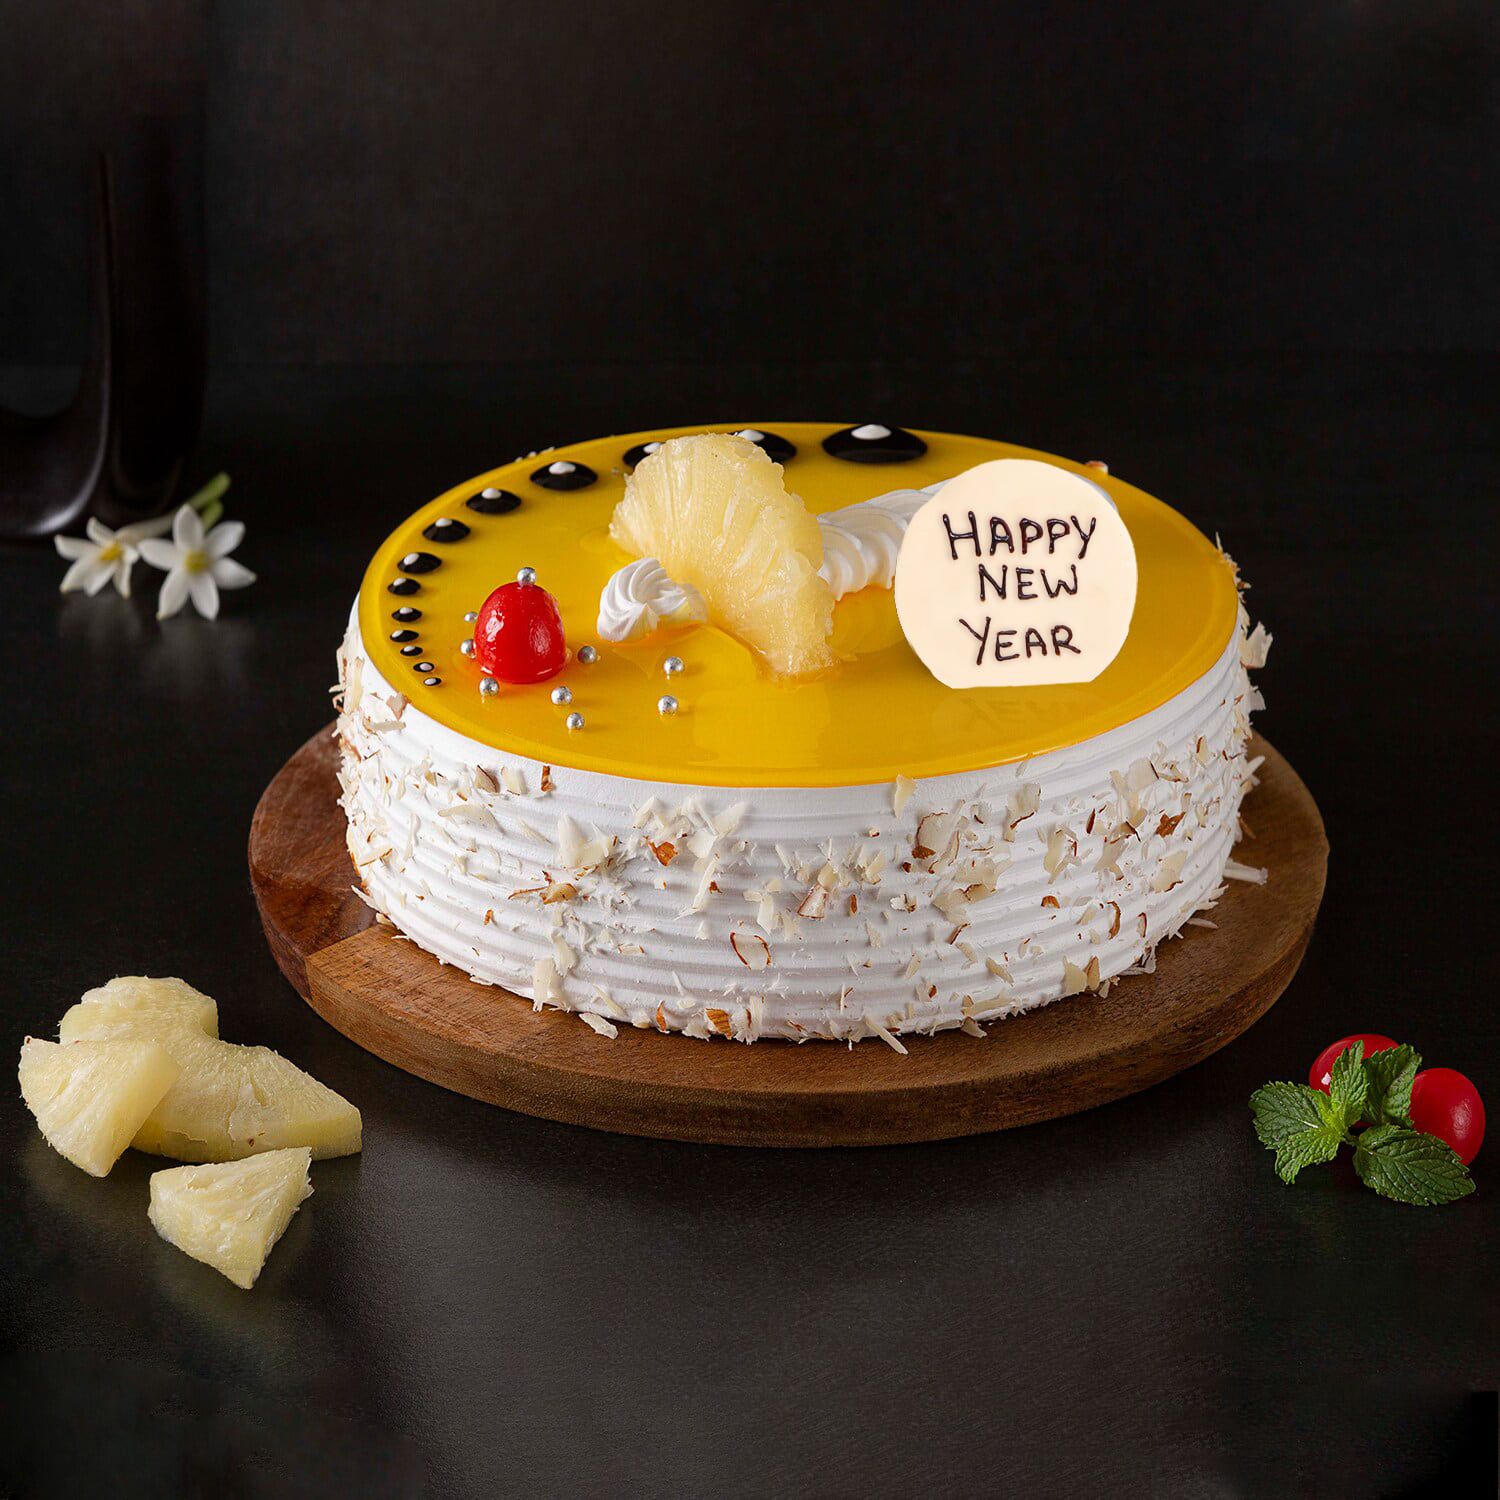 Send Online Happy New Year Butterscotch Cake To Your Loved Ones With  Winni.in | Winni.in